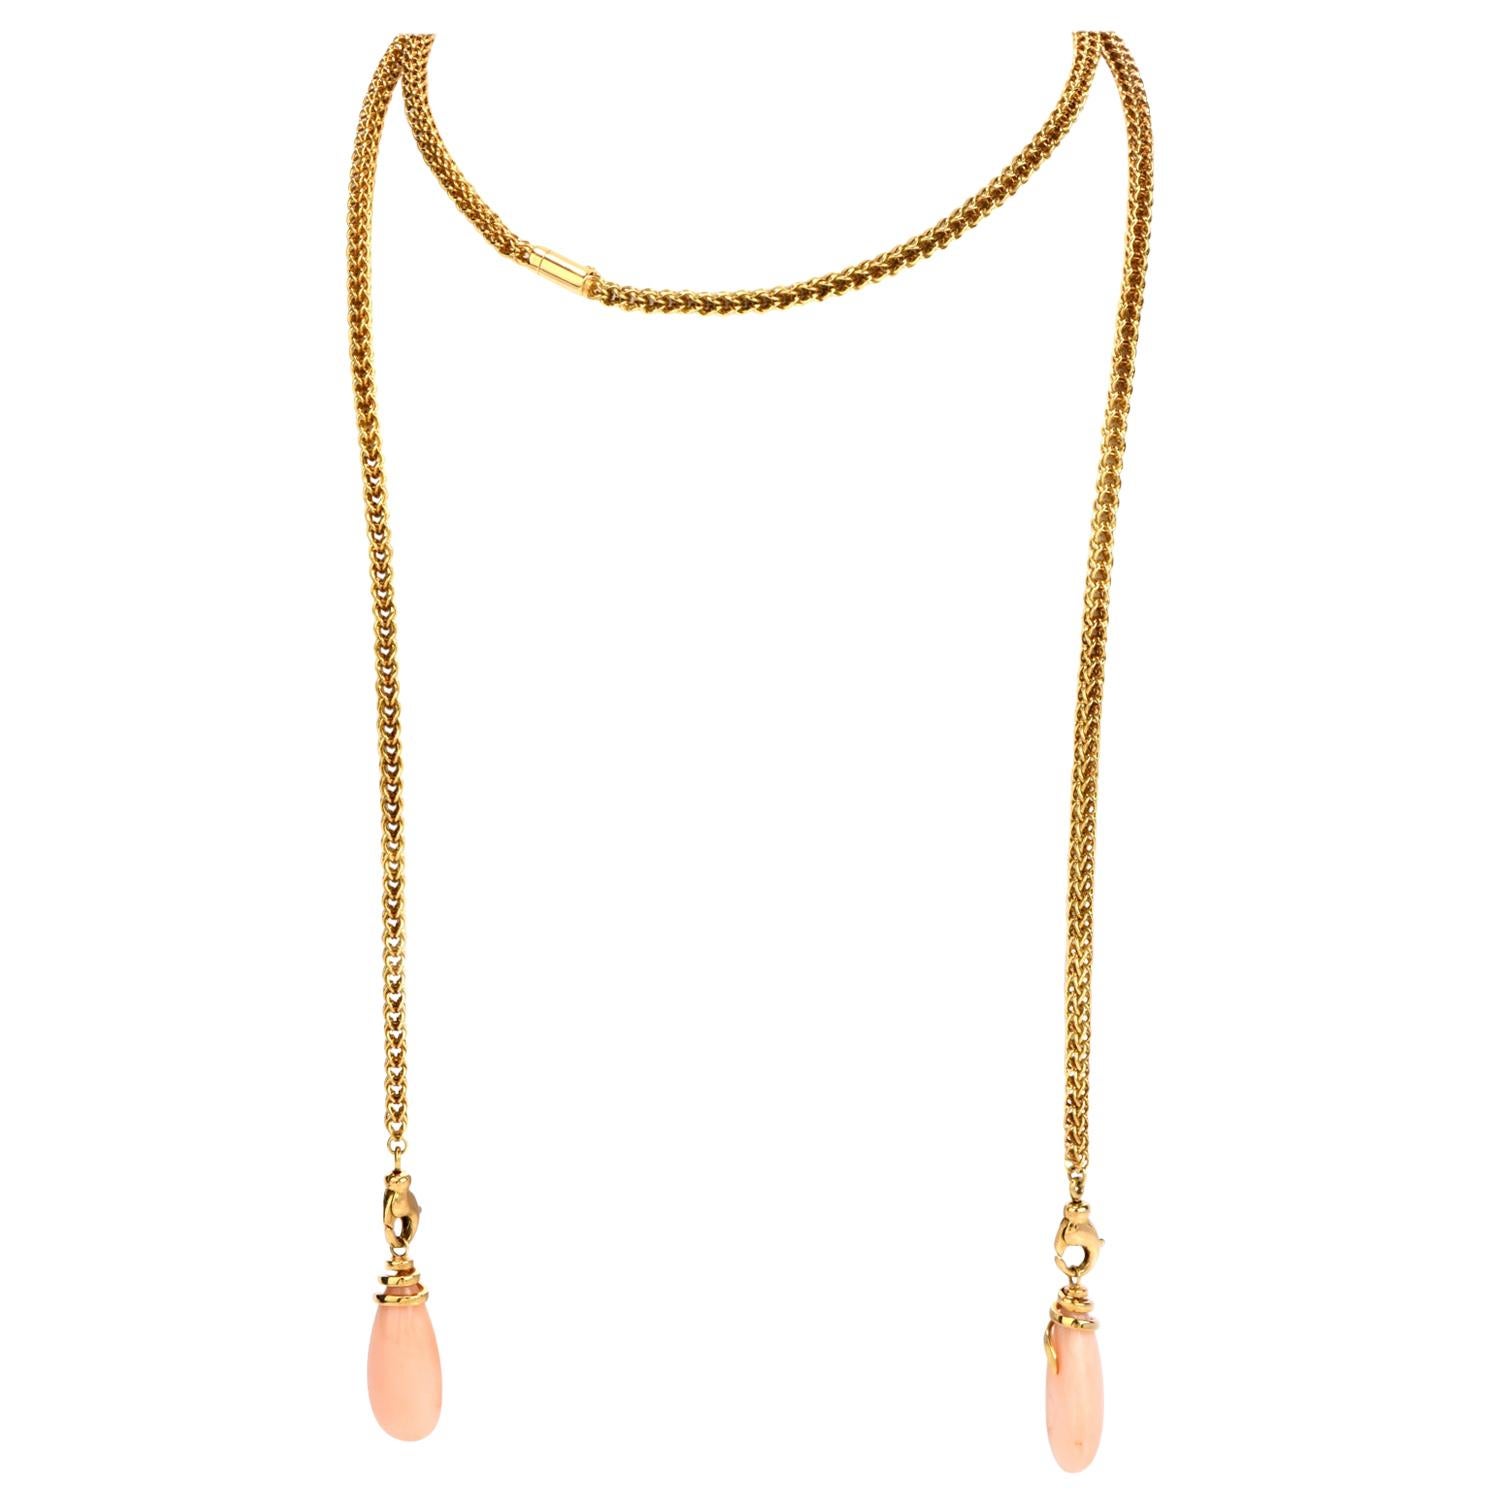 Have multiple beautiful pieces of jewelry in one with this versatile Vintage Coral 18K Gold Convertible Drop Necklace and Earring Jackets! 

This rope chain necklace is crafted in 18-karat yellow gold.  There are two lobster claw clasps near the